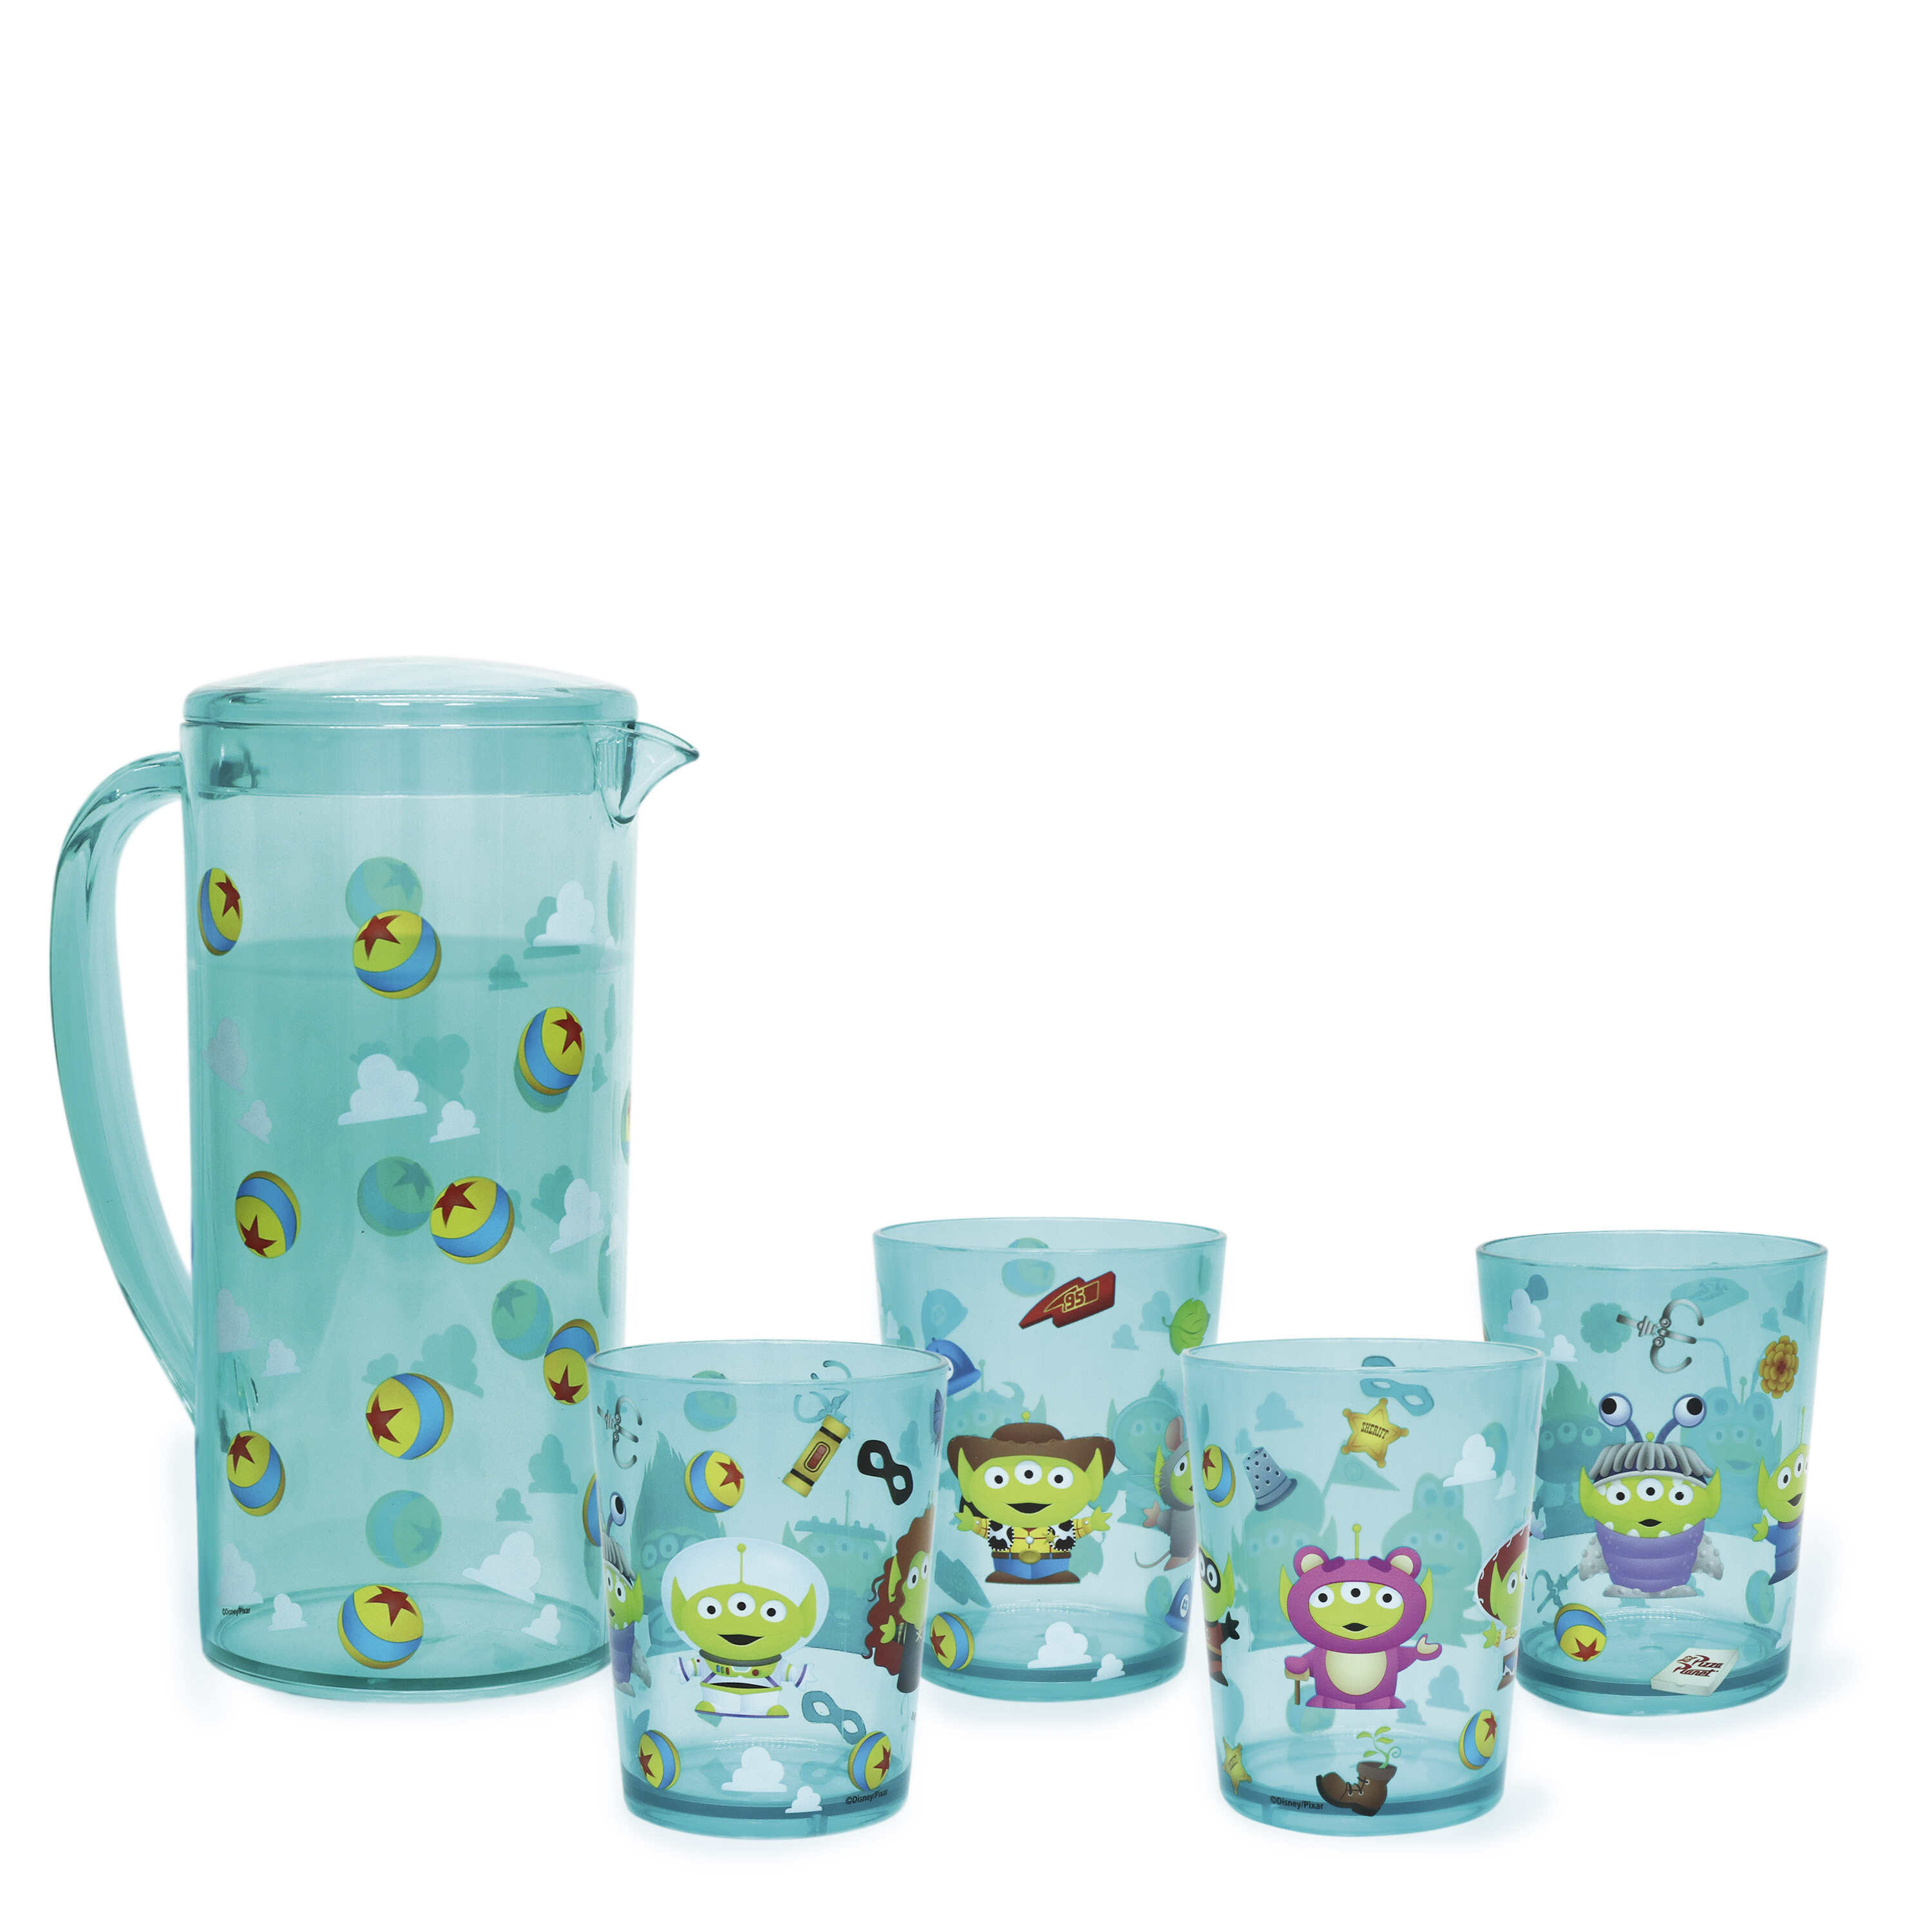 ZAK BPA FREE Disney Toy Story Tumbler Cup & Sport Water Bottle with pull up top 